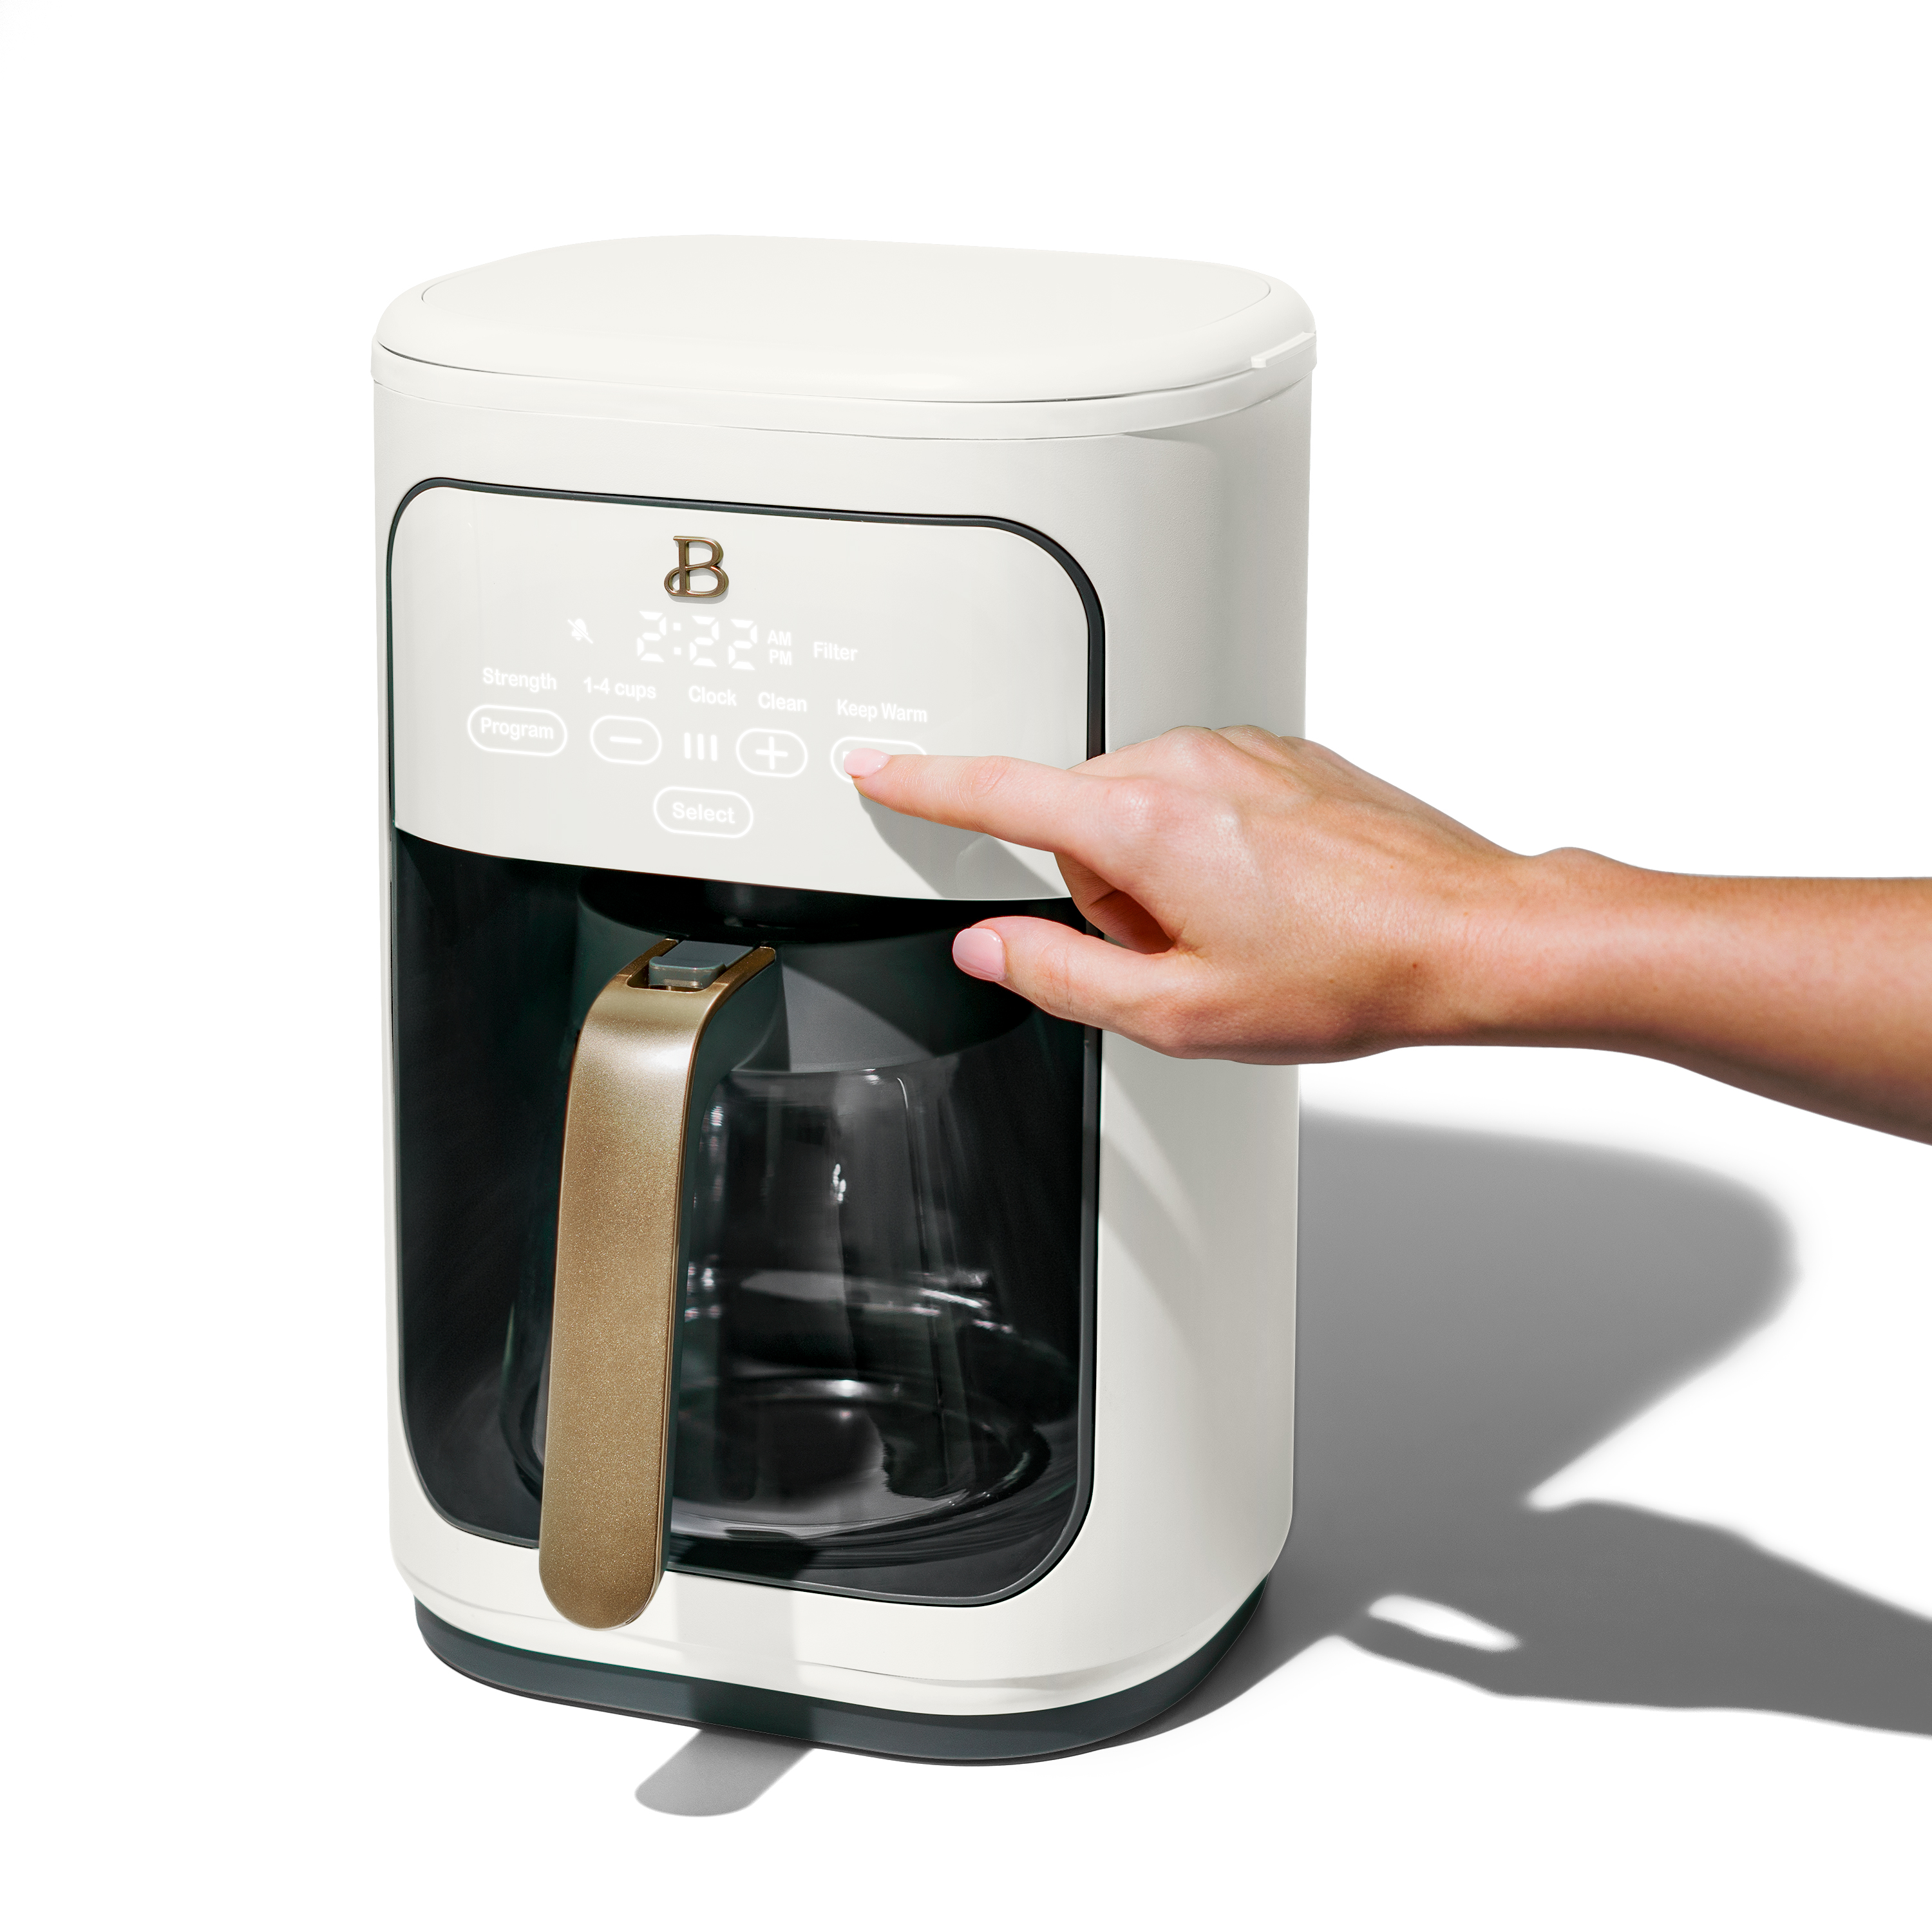 Beautiful 14-Cup Programmable Drip Coffee Maker with Touch-Activated Display, White Icing by Drew Barrymore - image 4 of 6